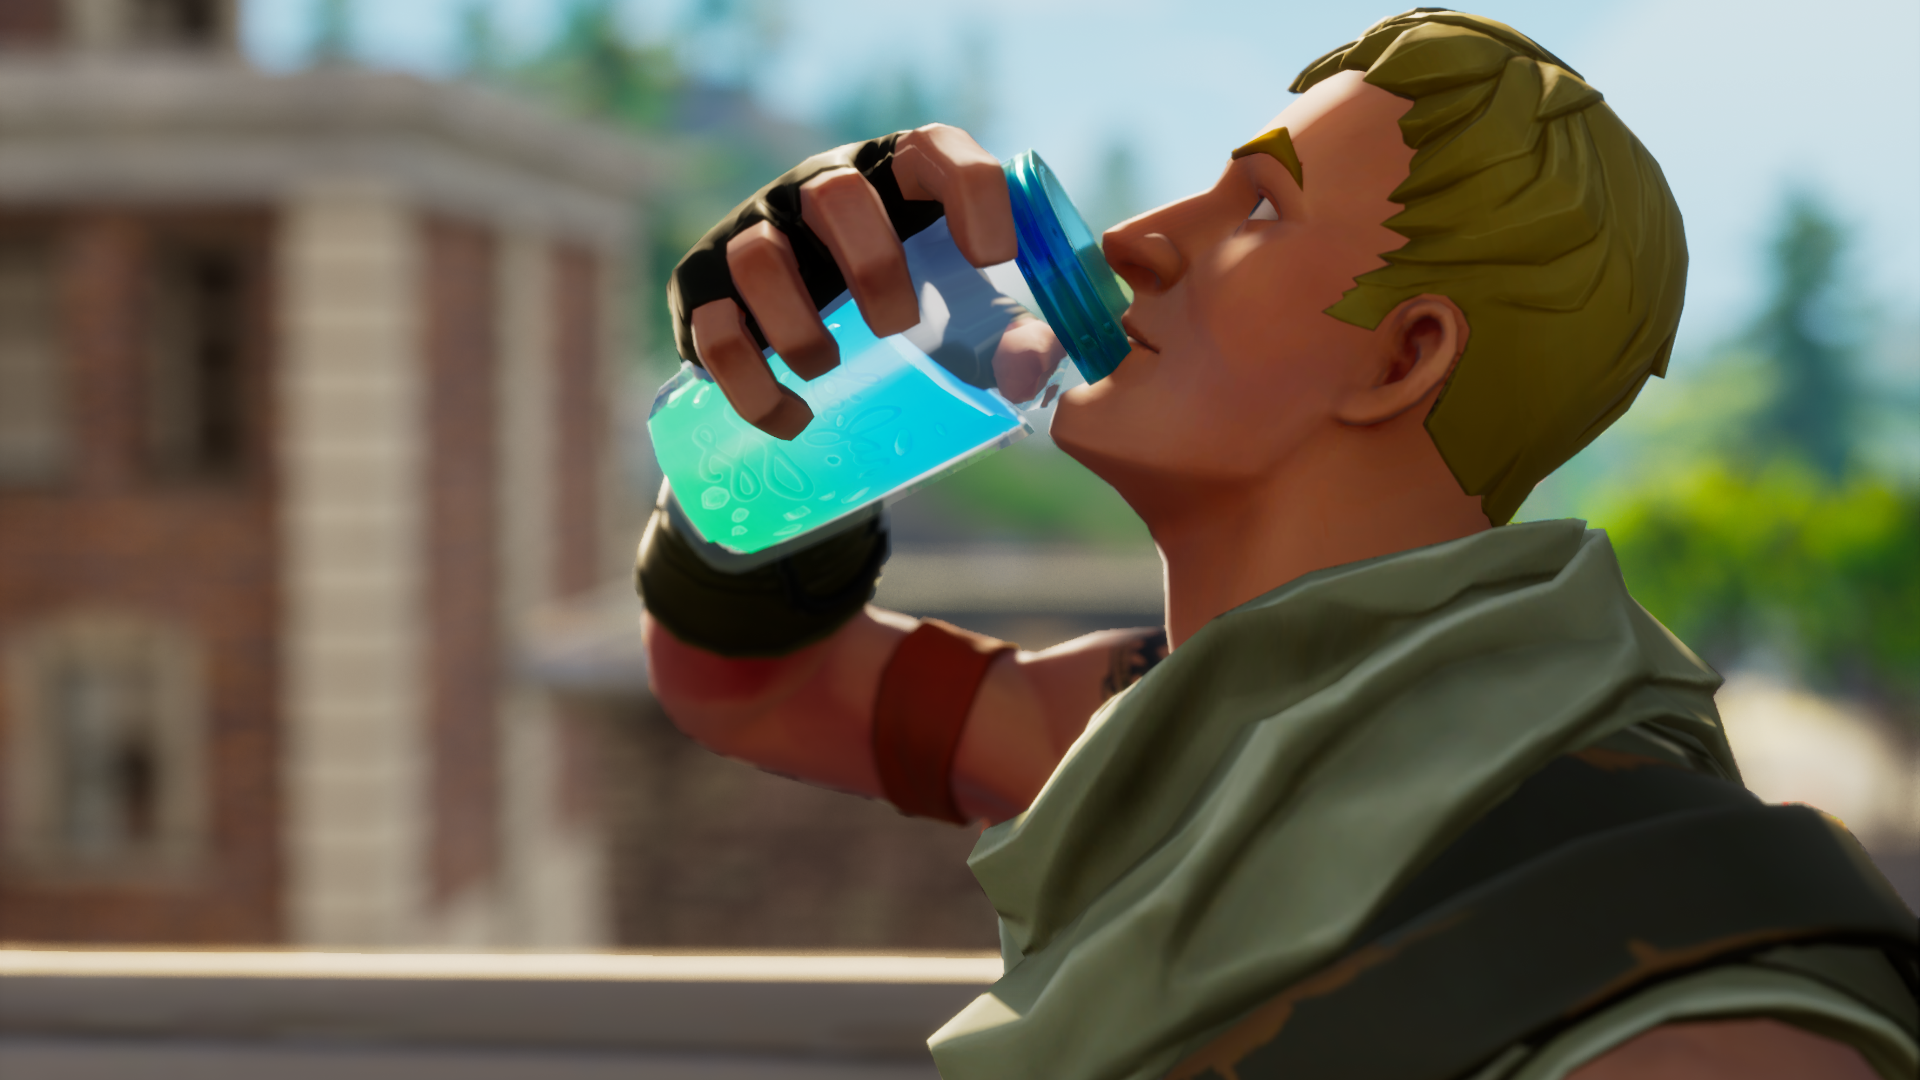 Fortnite's v9.30 update brings a refreshing new beverage tomorrow, Epic confirms